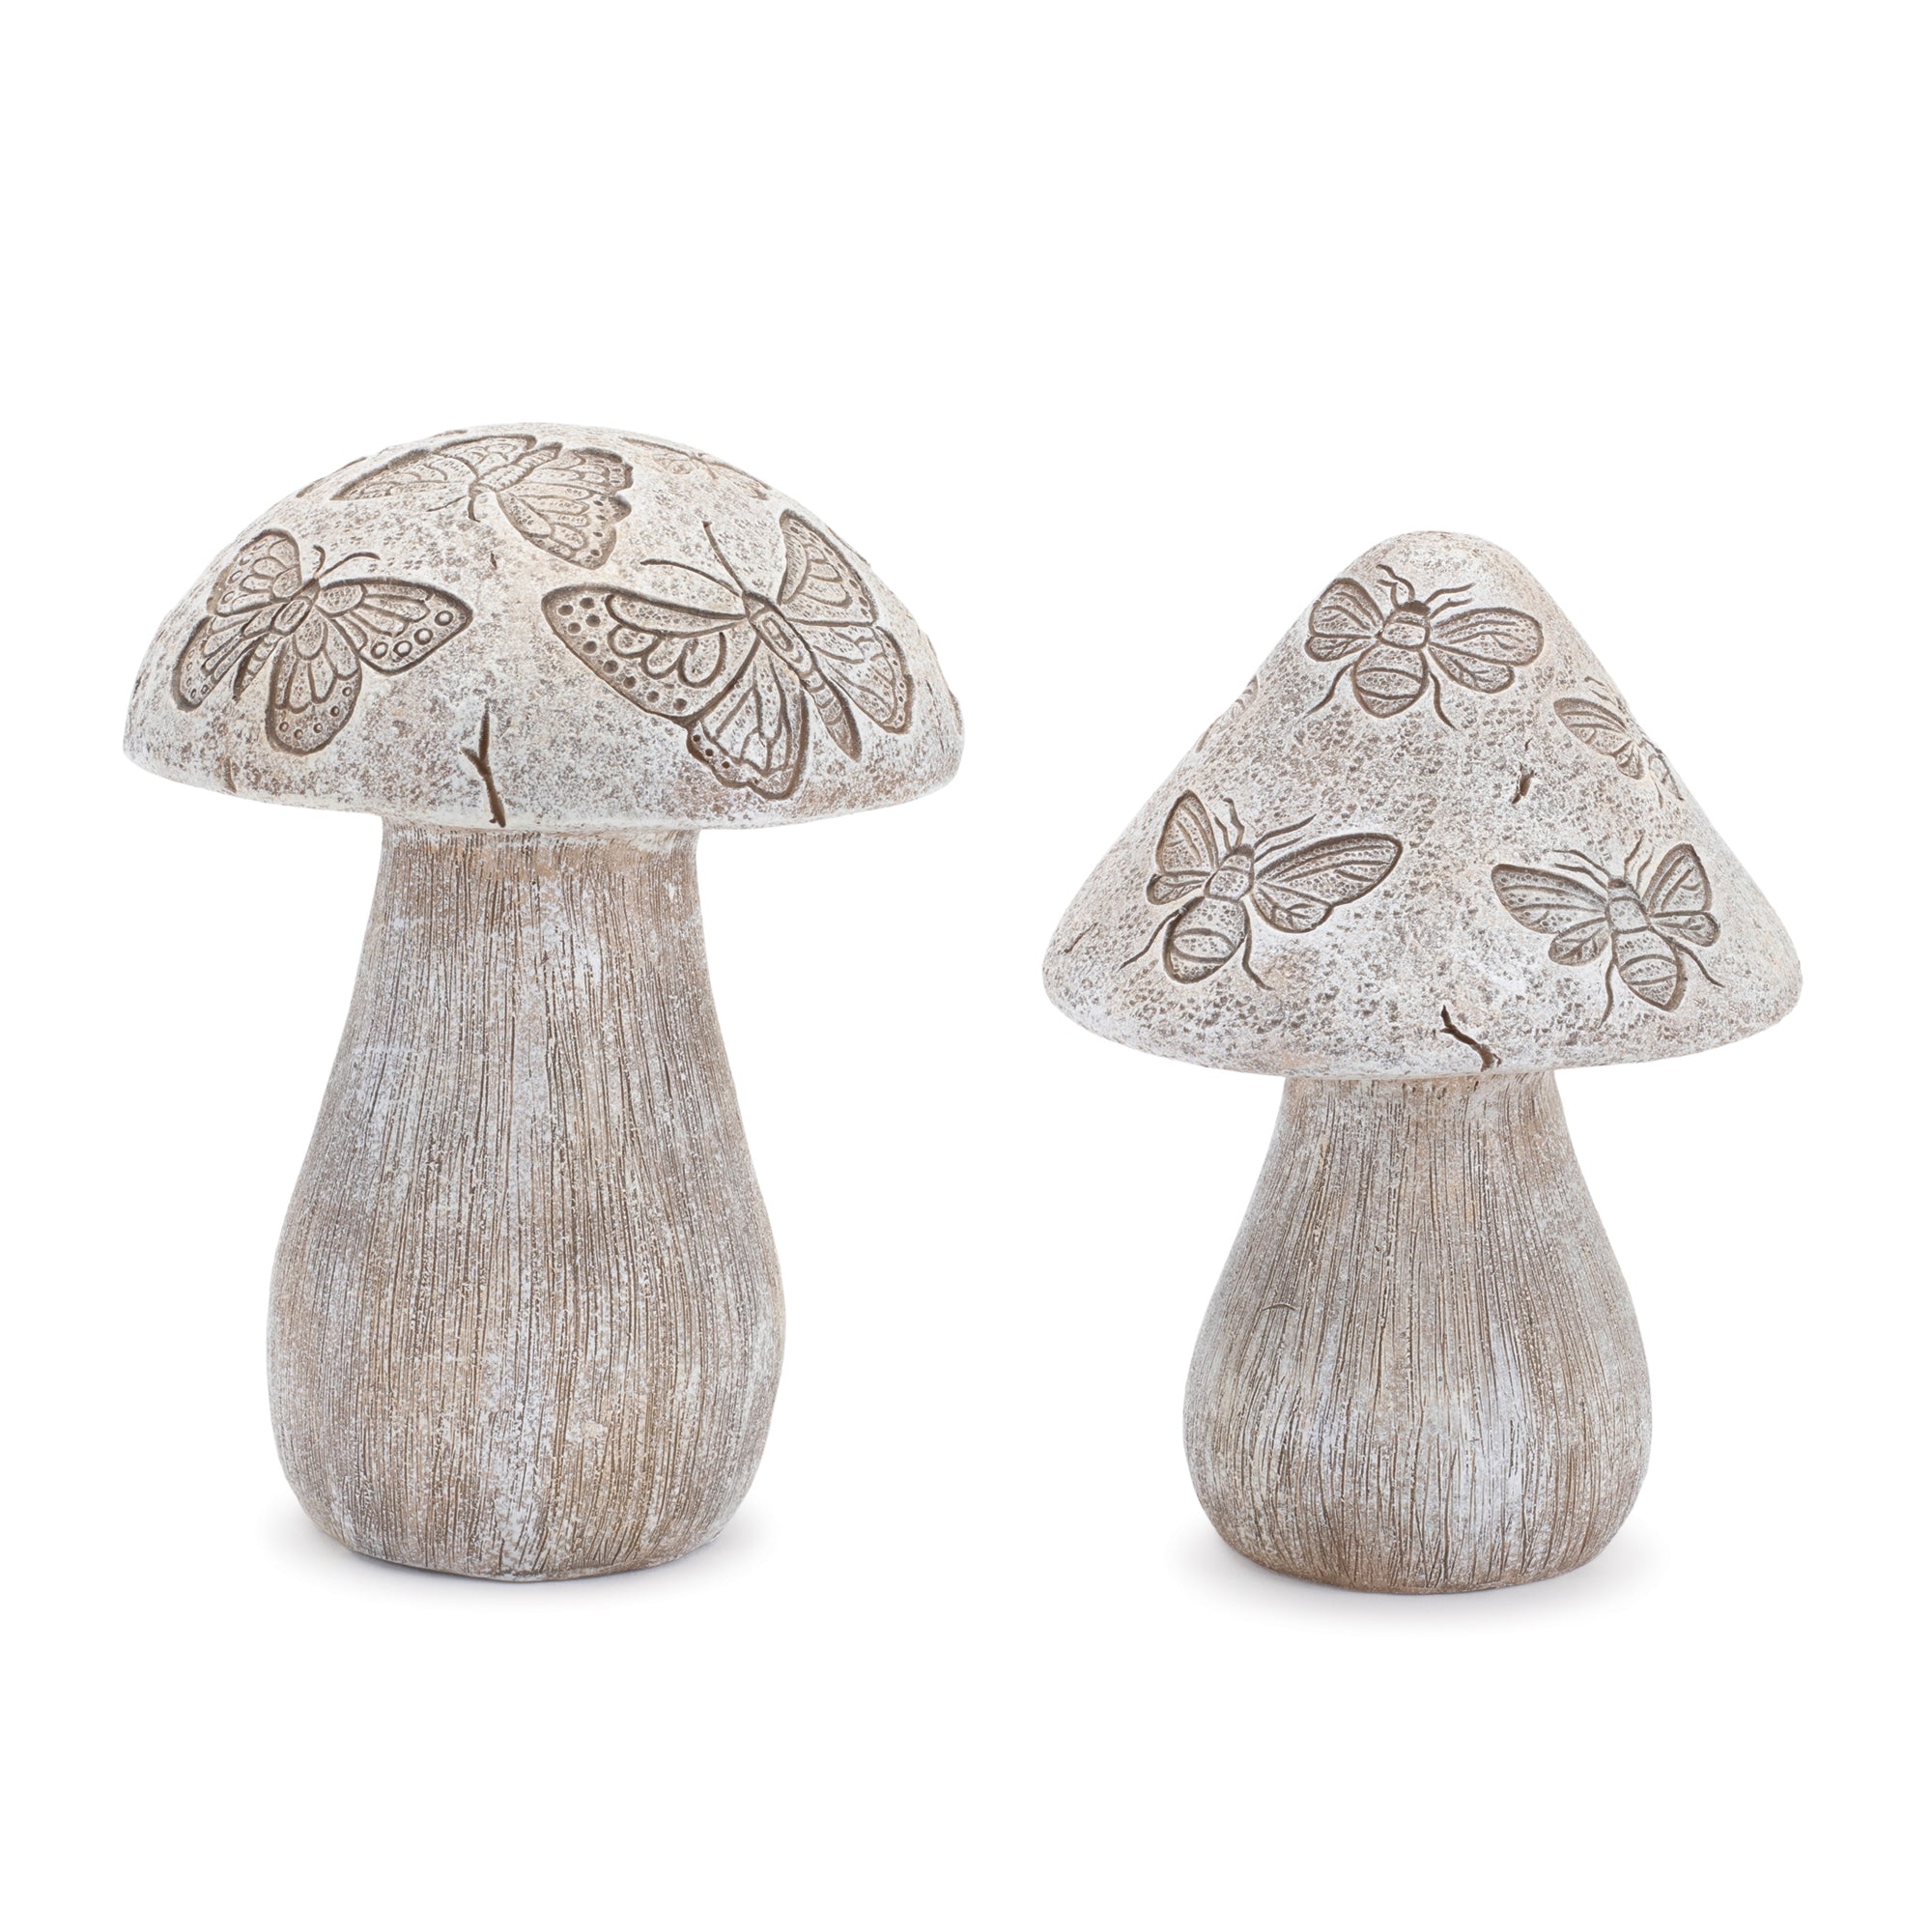 Bumble Bee and Butterfly Print Mushroom (Set of 2)